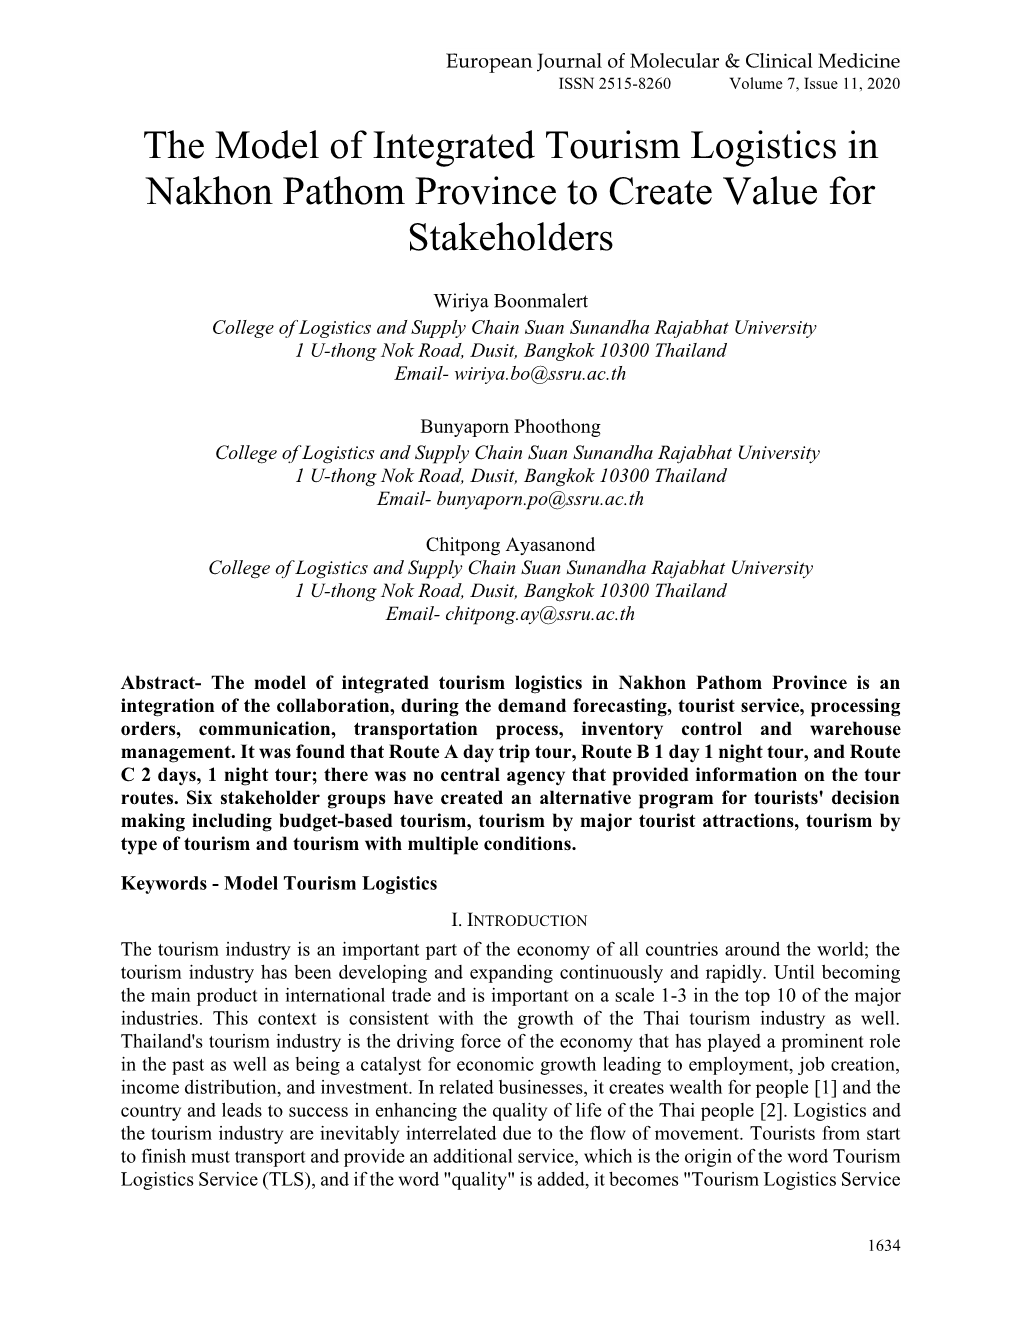 The Model of Integrated Tourism Logistics in Nakhon Pathom Province to Create Value for Stakeholders